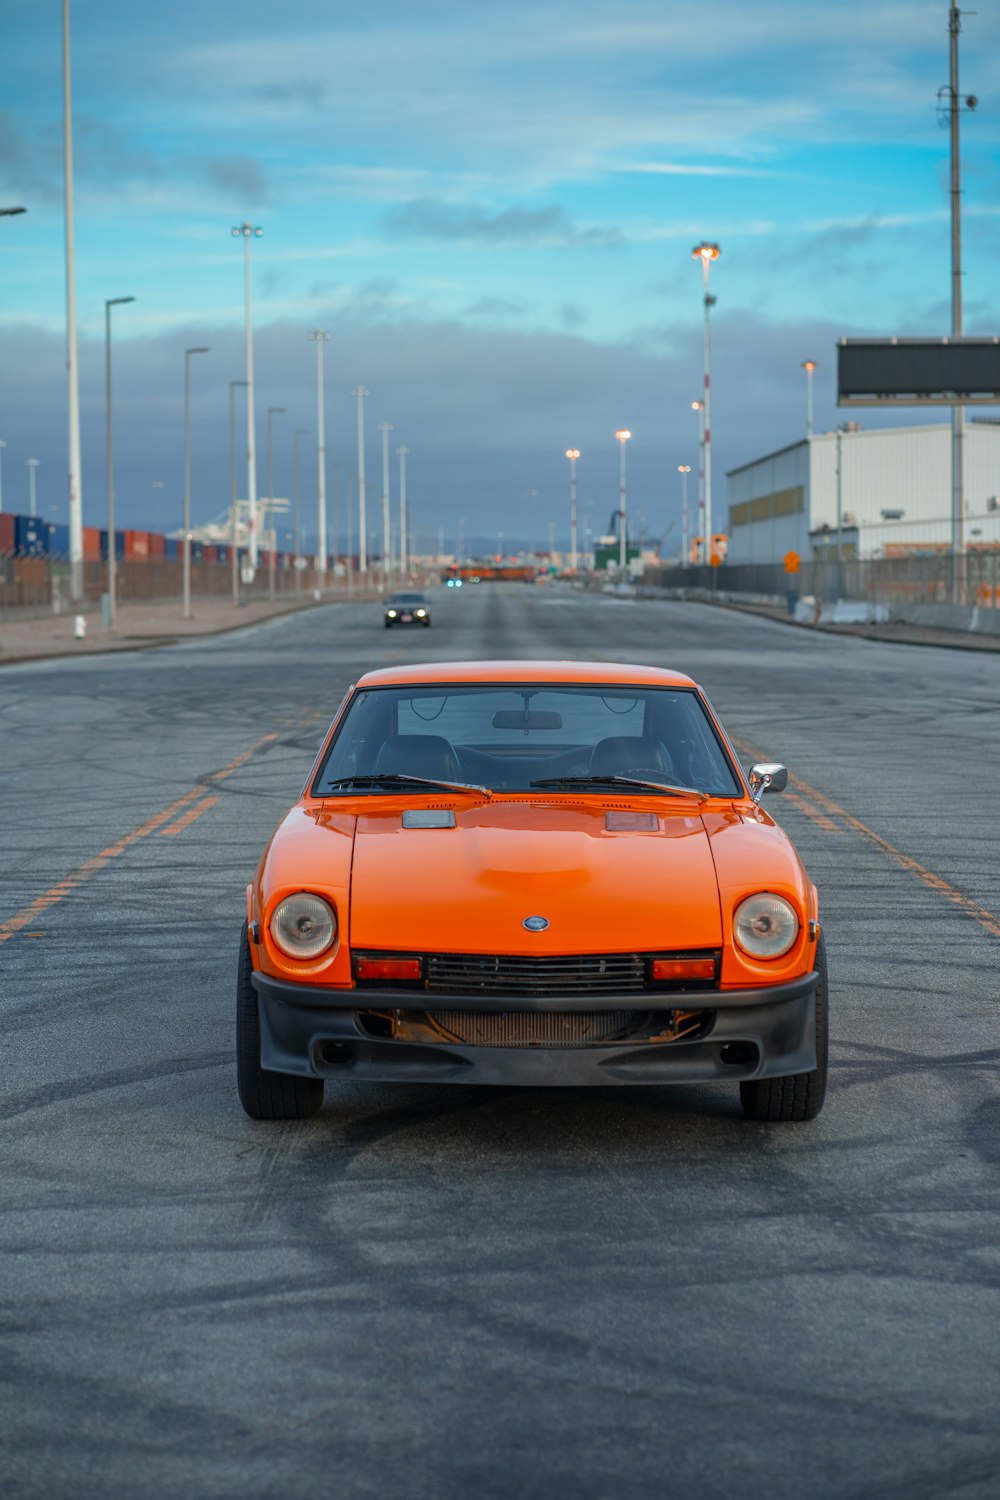 an orange car is parked on the side of the road